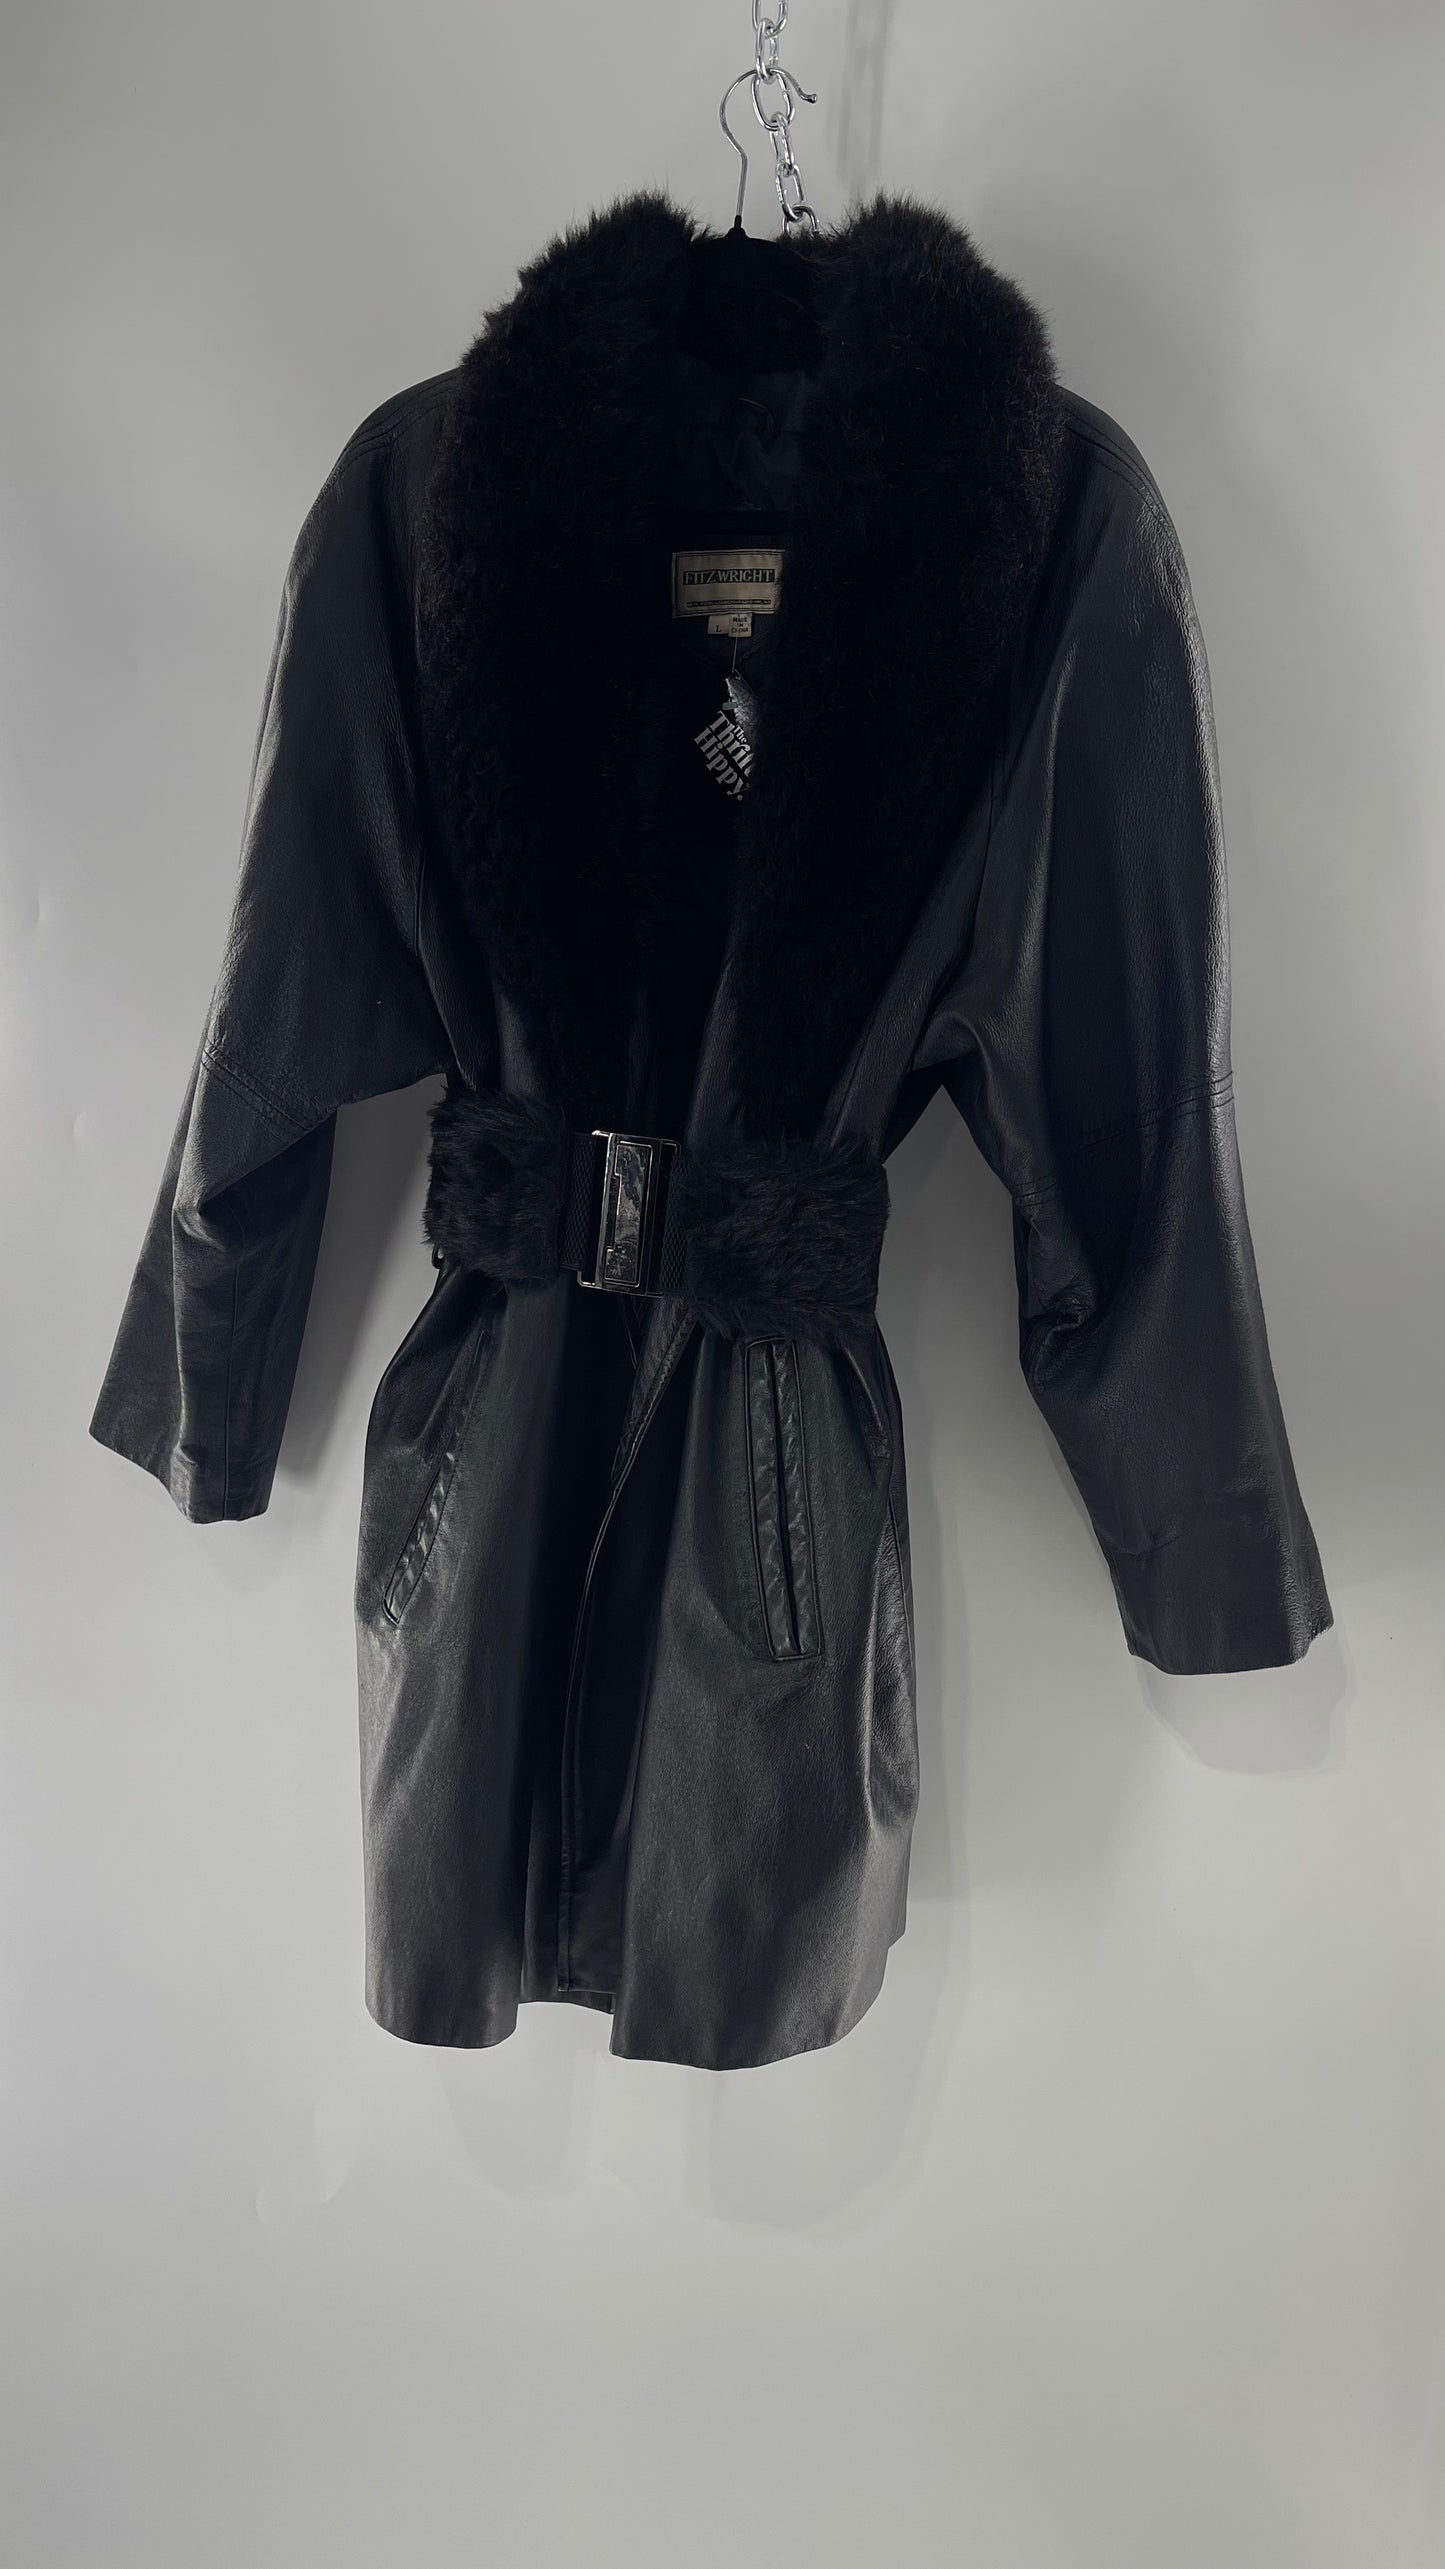 FITZWRIGHT Vintage Black Leather Coat with New Zealand Opposum Fur Collar and Faux Fur Belt  (C)(Large)